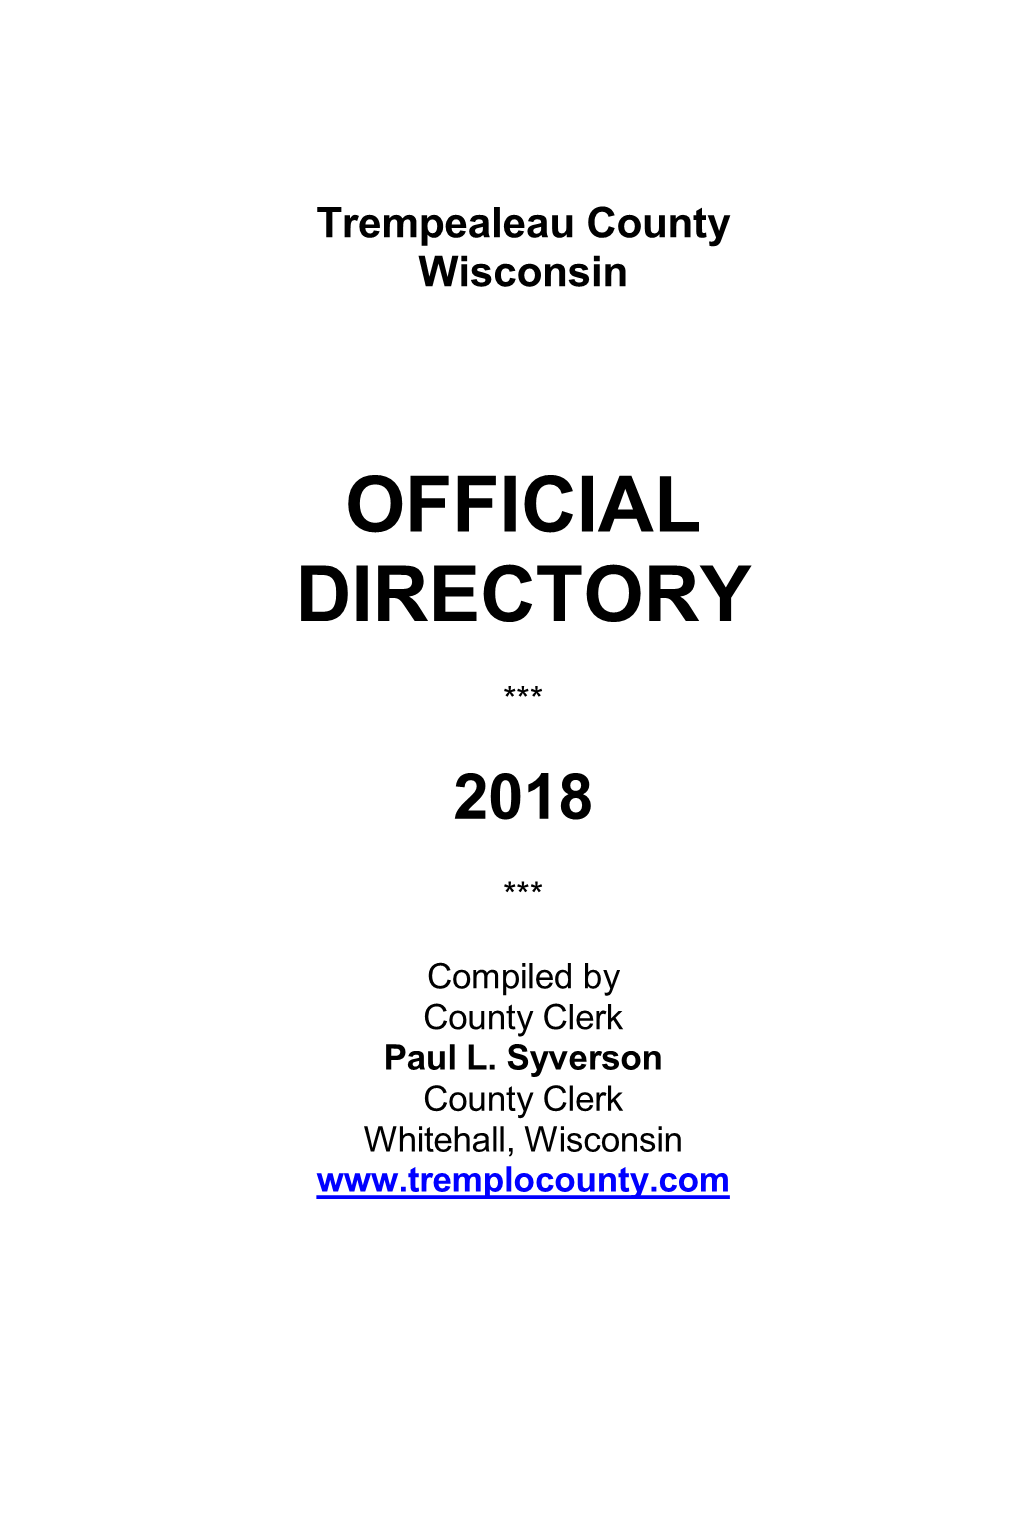 2018 Trempealeau County Official Directory